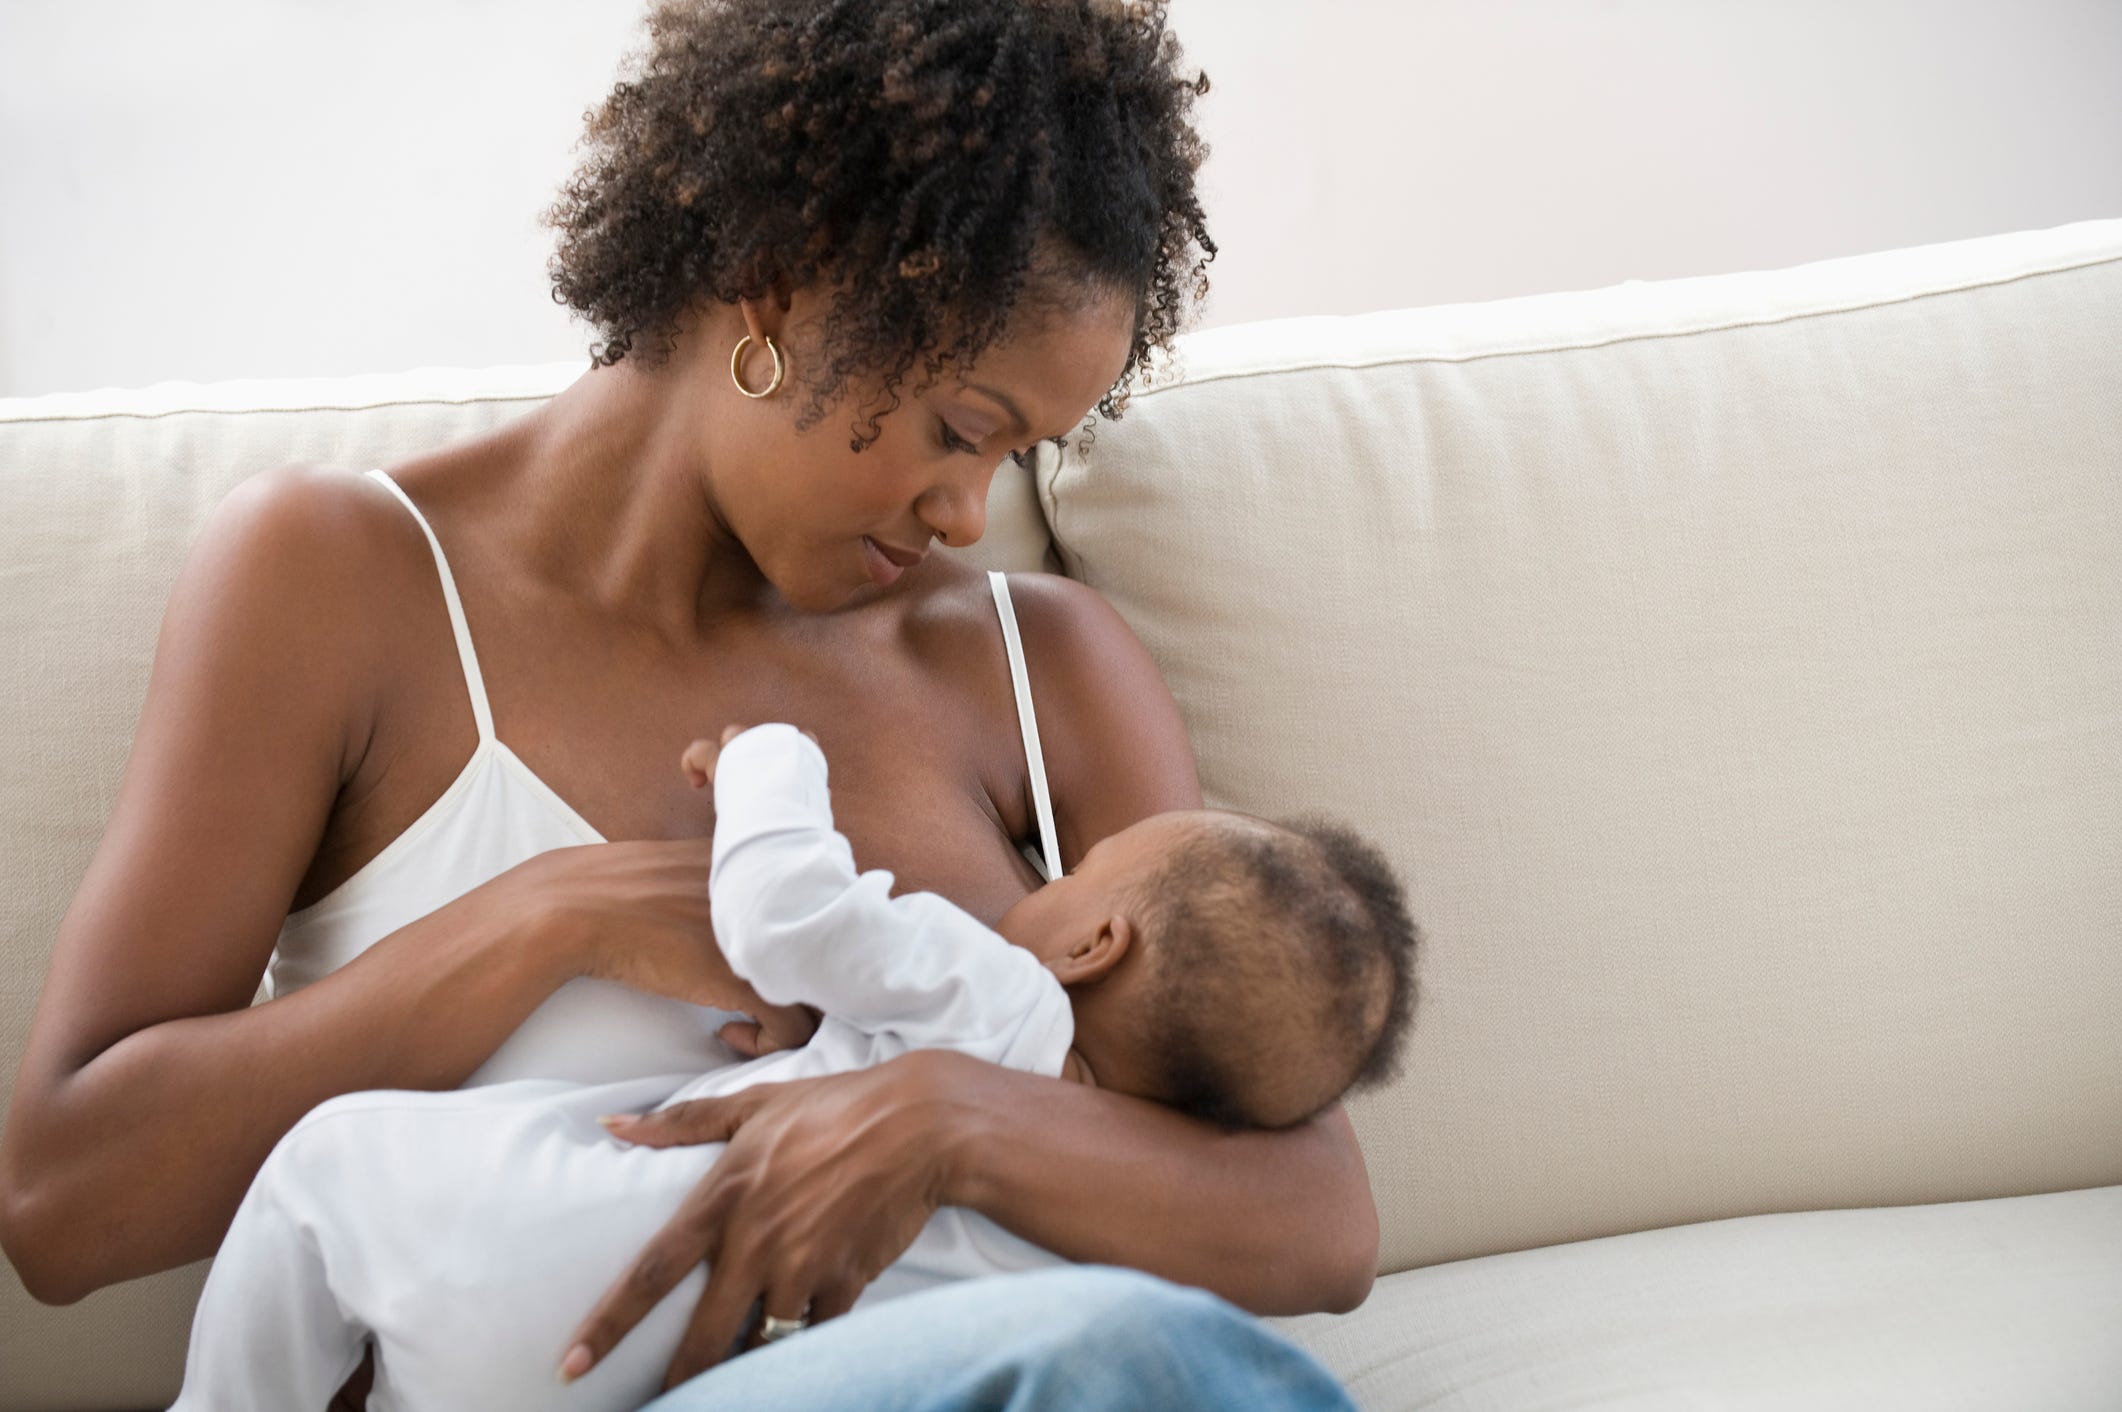 Breastfeeding in public explained, even though we shouldn't have to